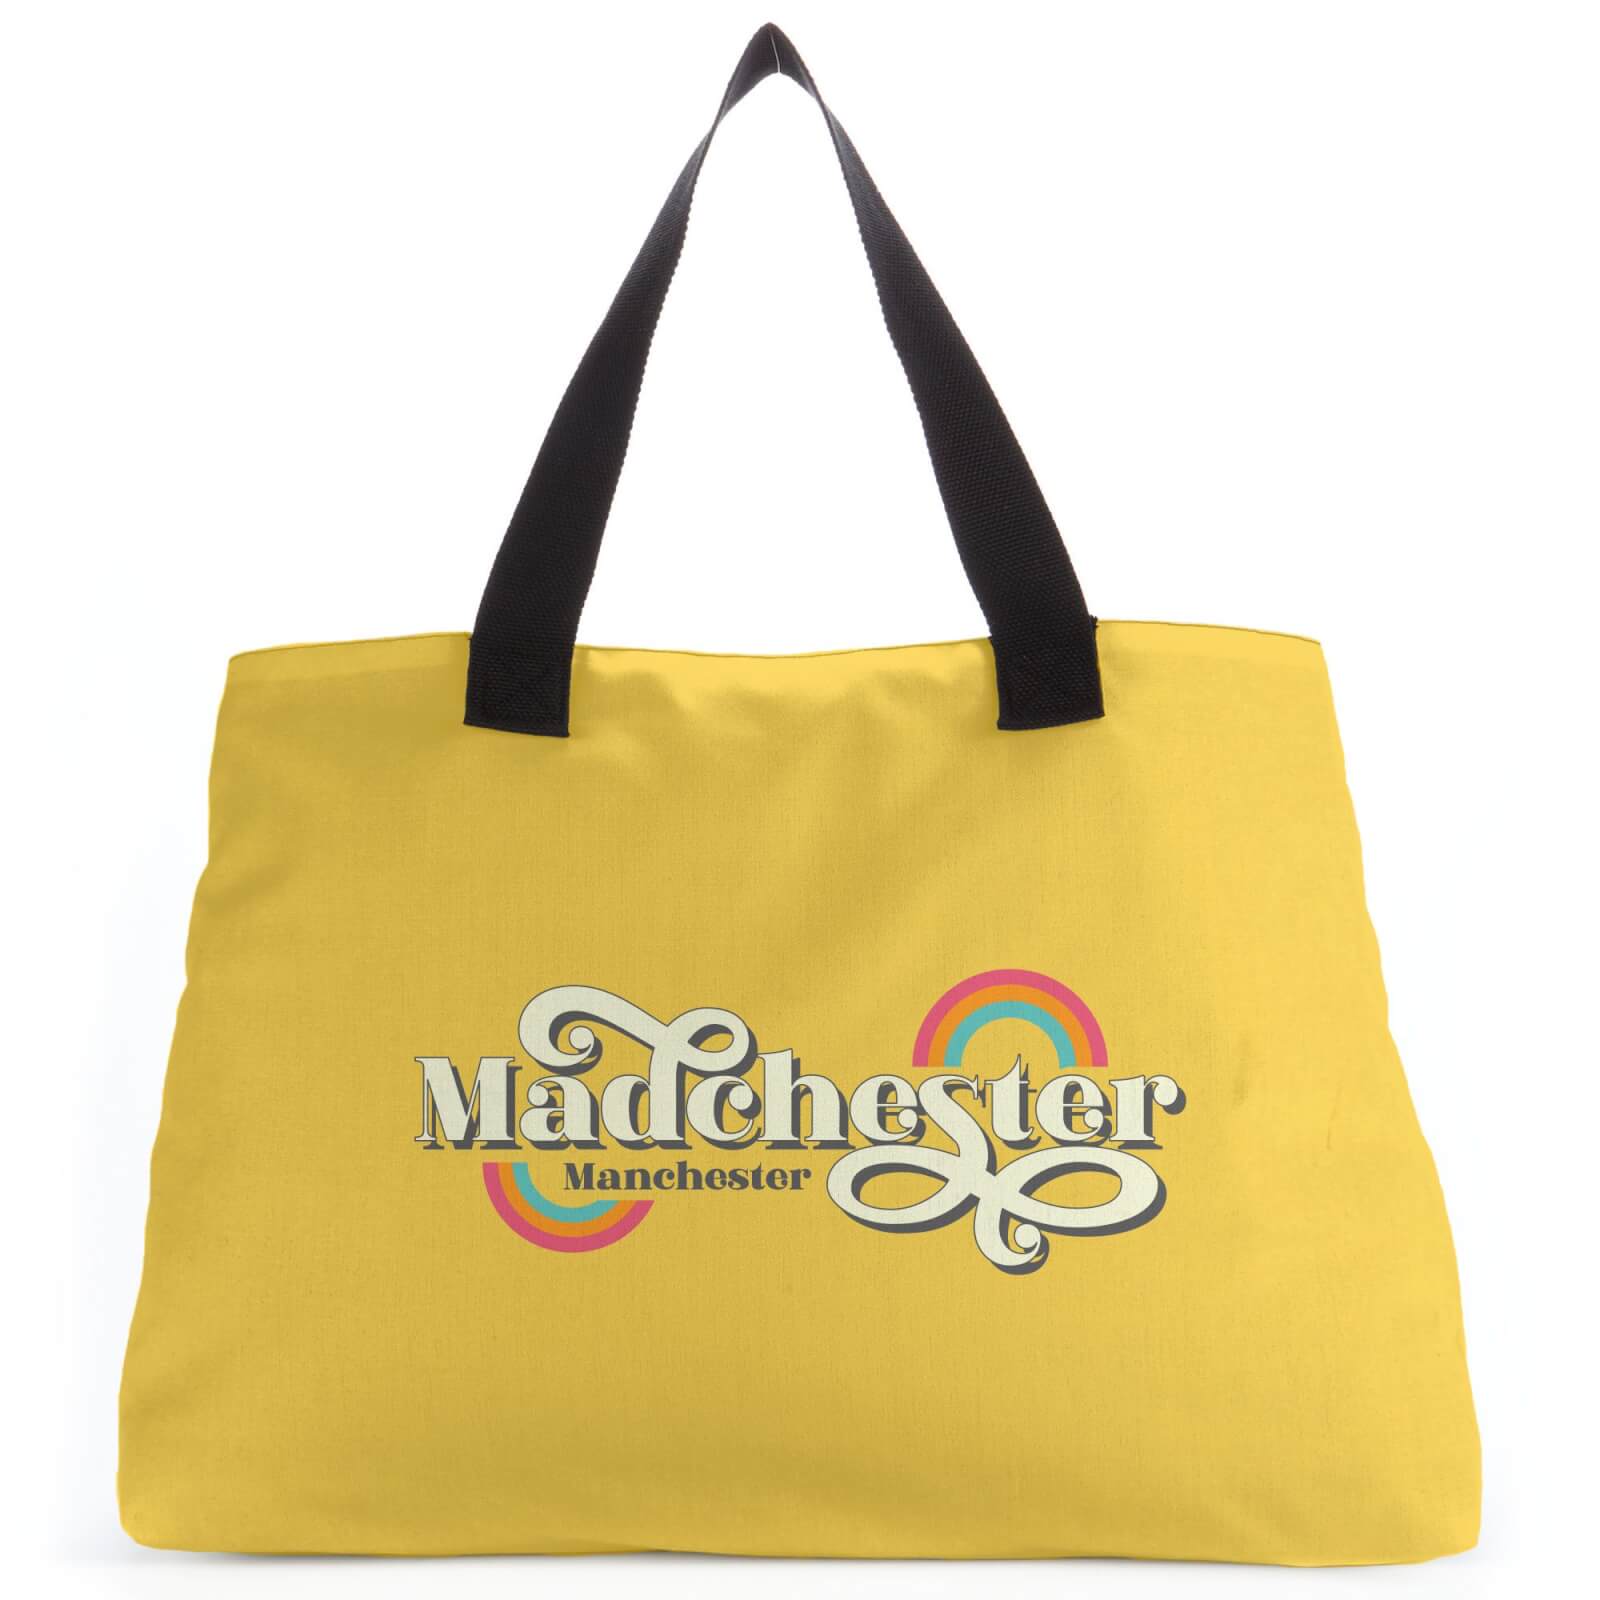 Madchester Tote Bag